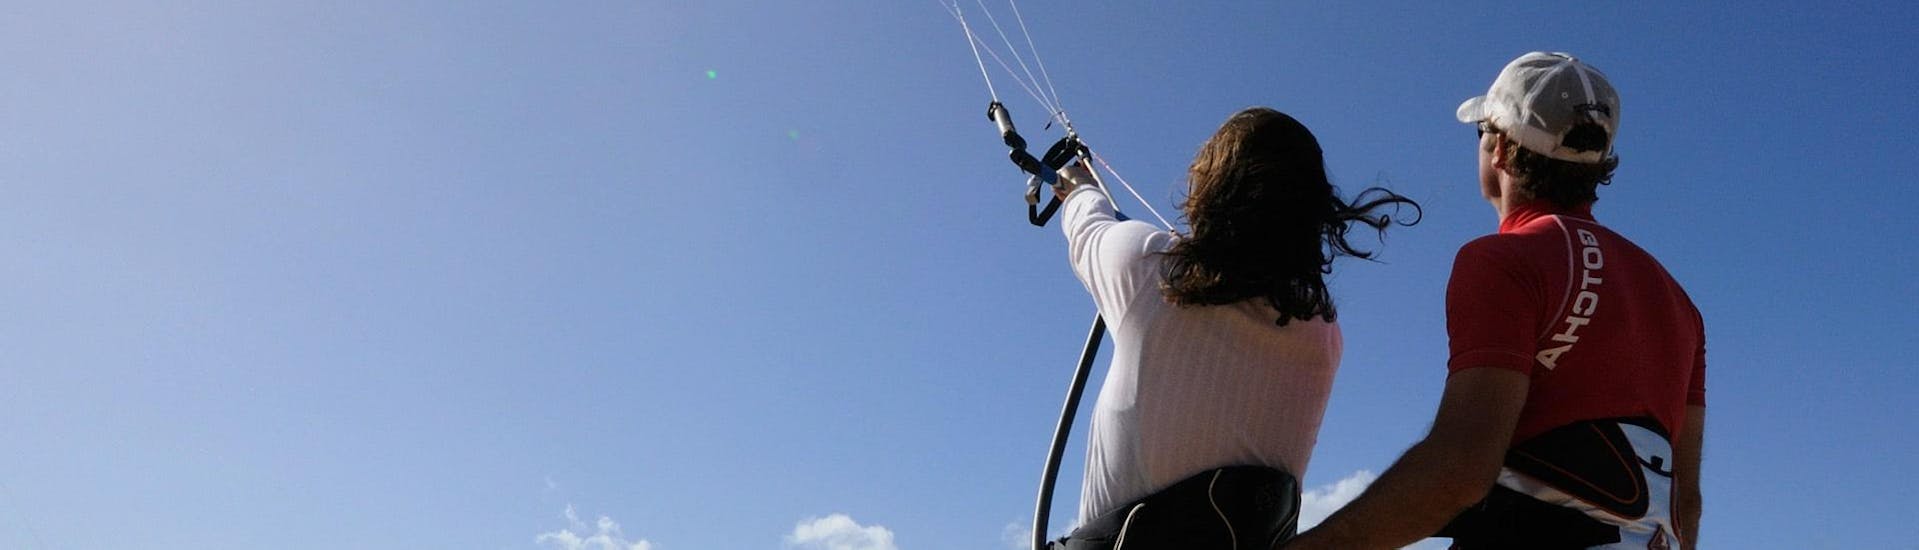 Private Kitesurfing Lesson from 12 Years - All Levels.